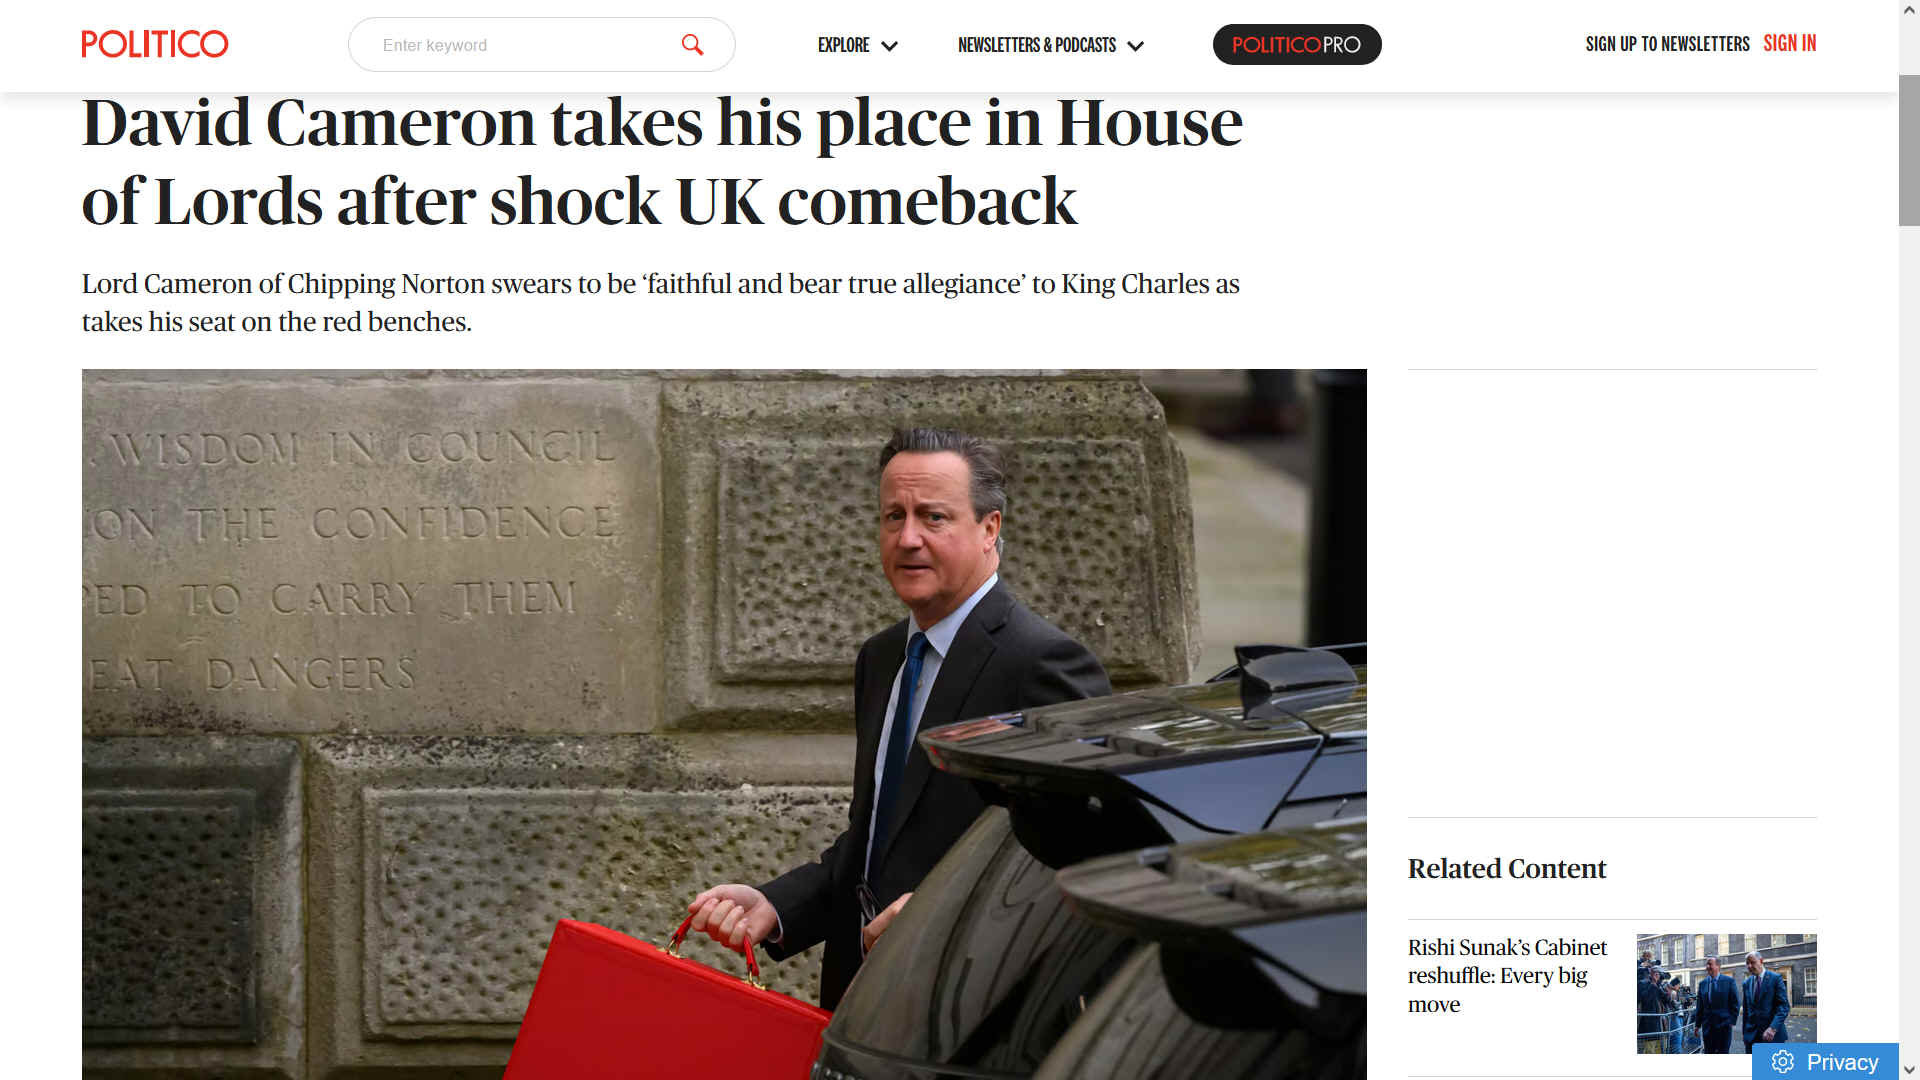 DESPERATE DAVE TAKES HIS UNELECTED PLACE IN THE HOUSE OF LORDS AFTER SHOCK UK COMEBACK